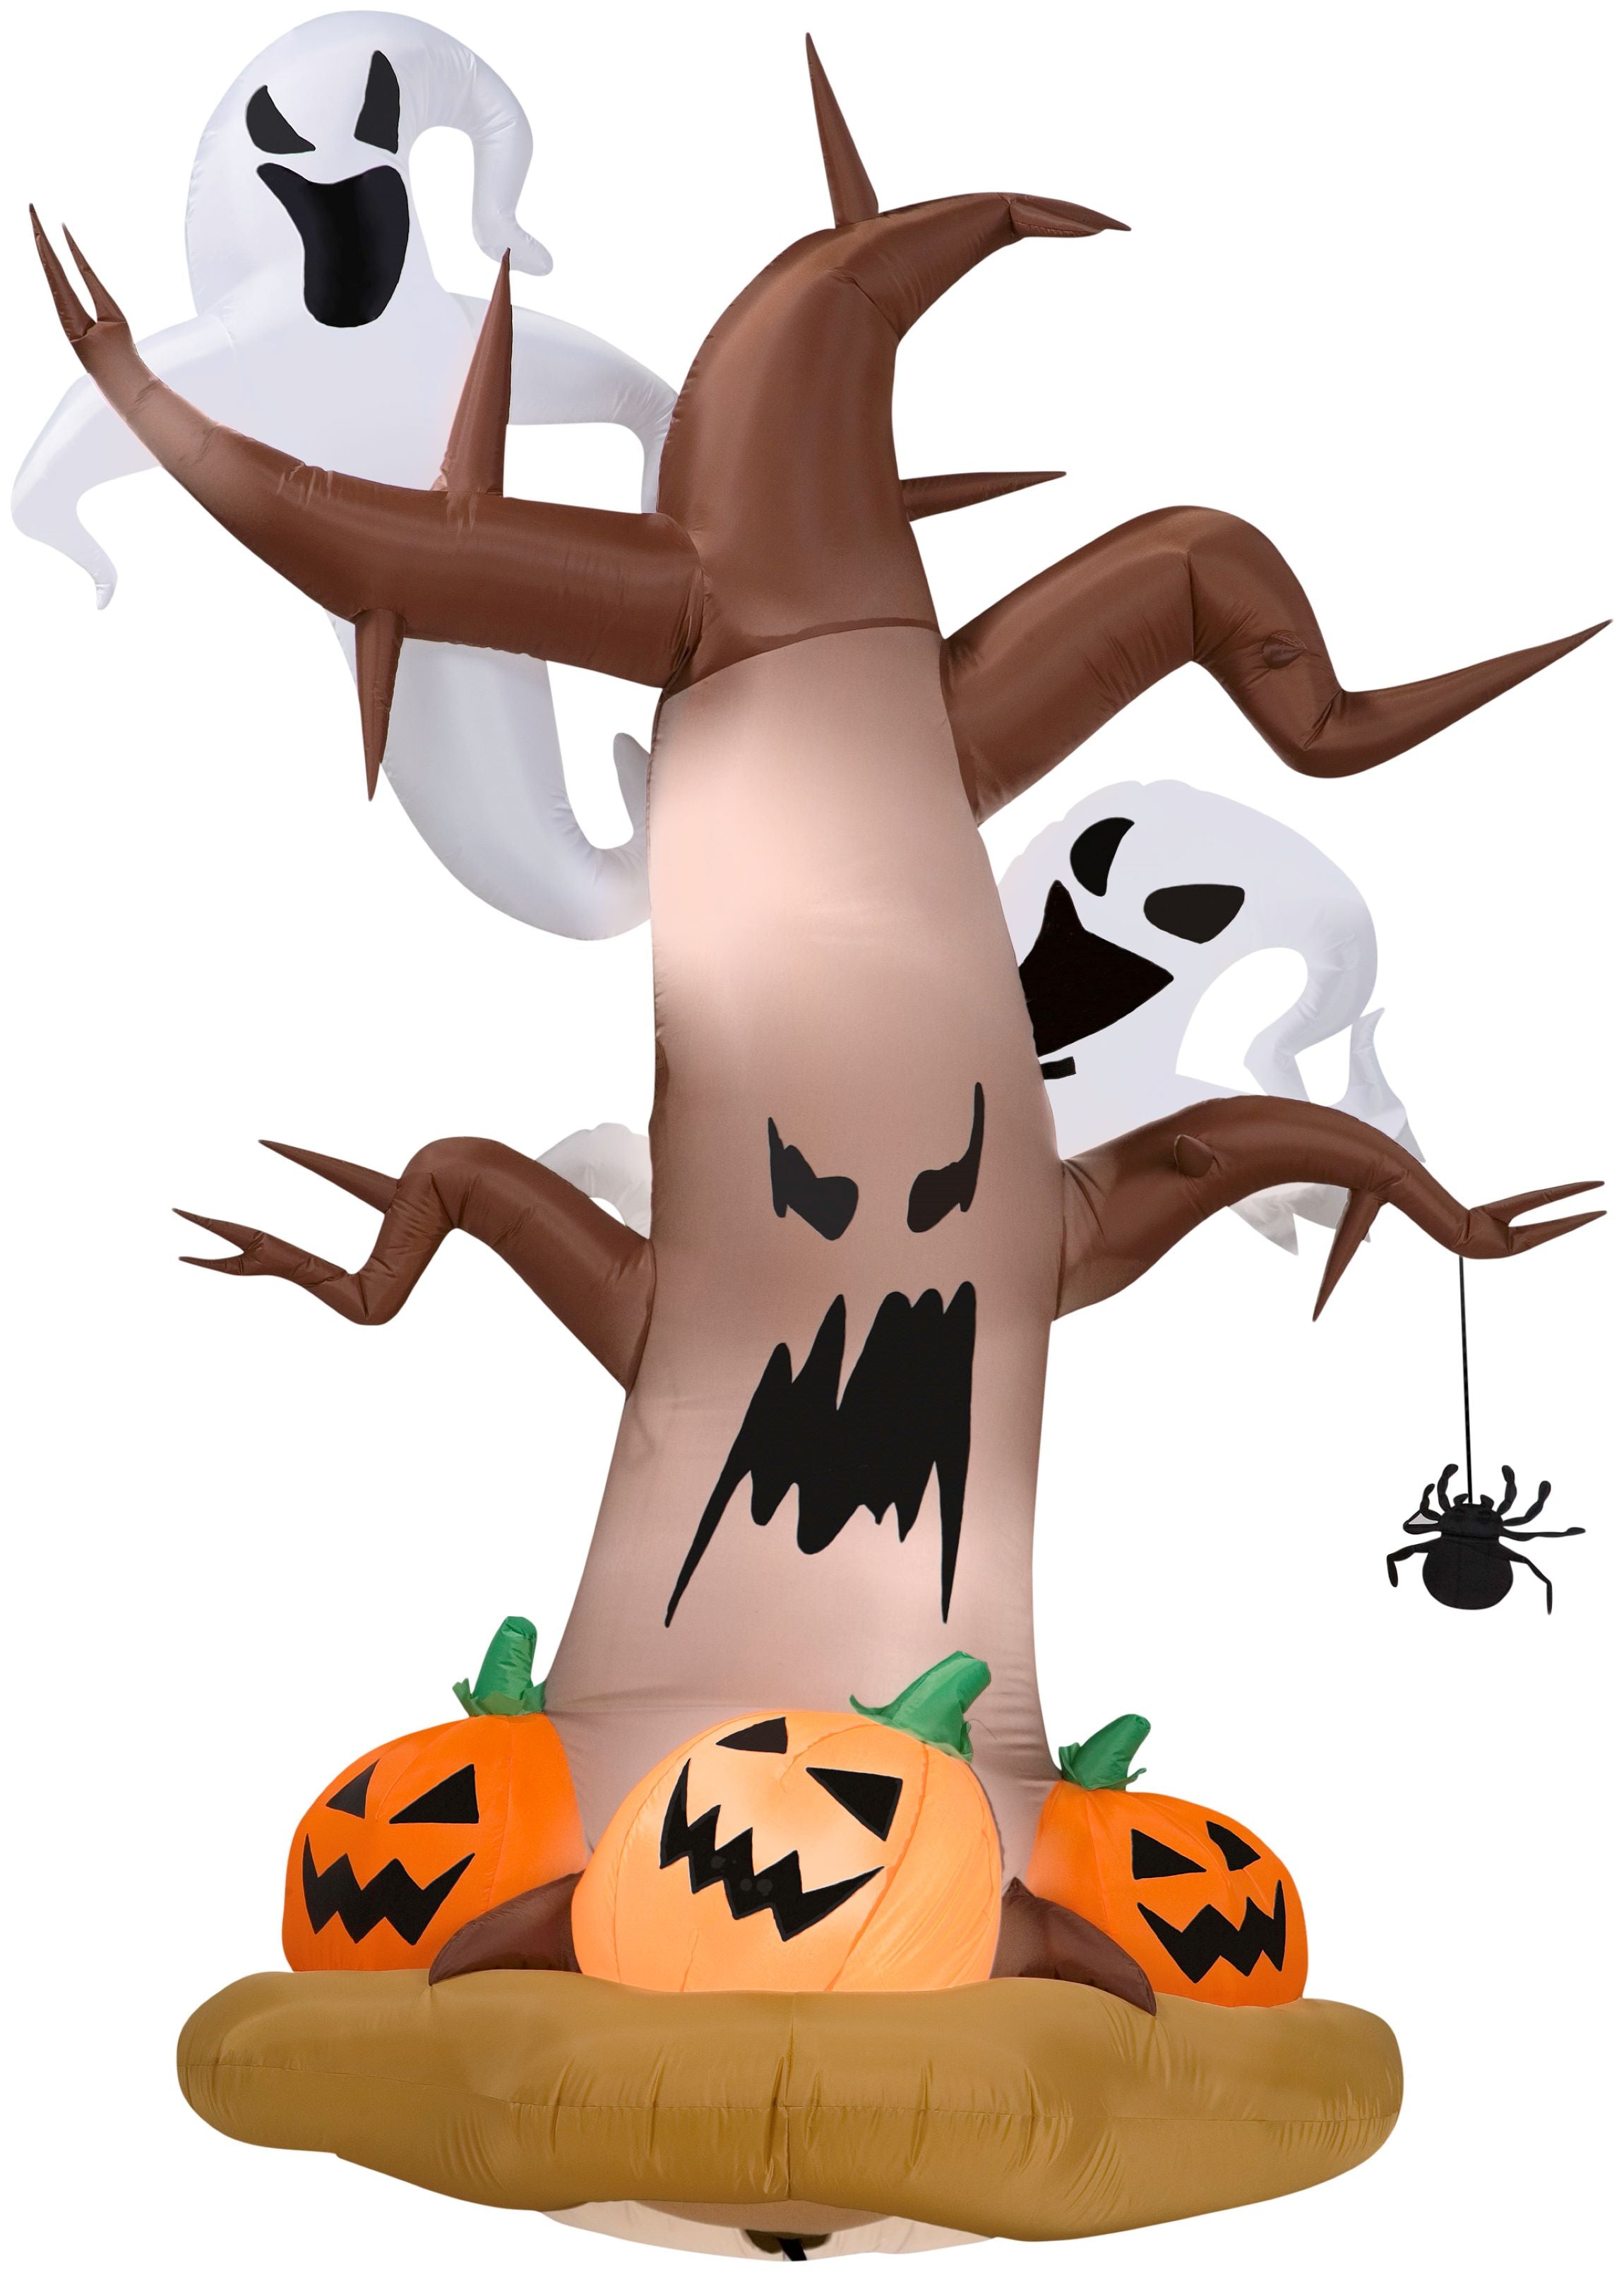 8' Airblown Dead Tree w/ Ghosts and Pumpkins Halloween Inflatable